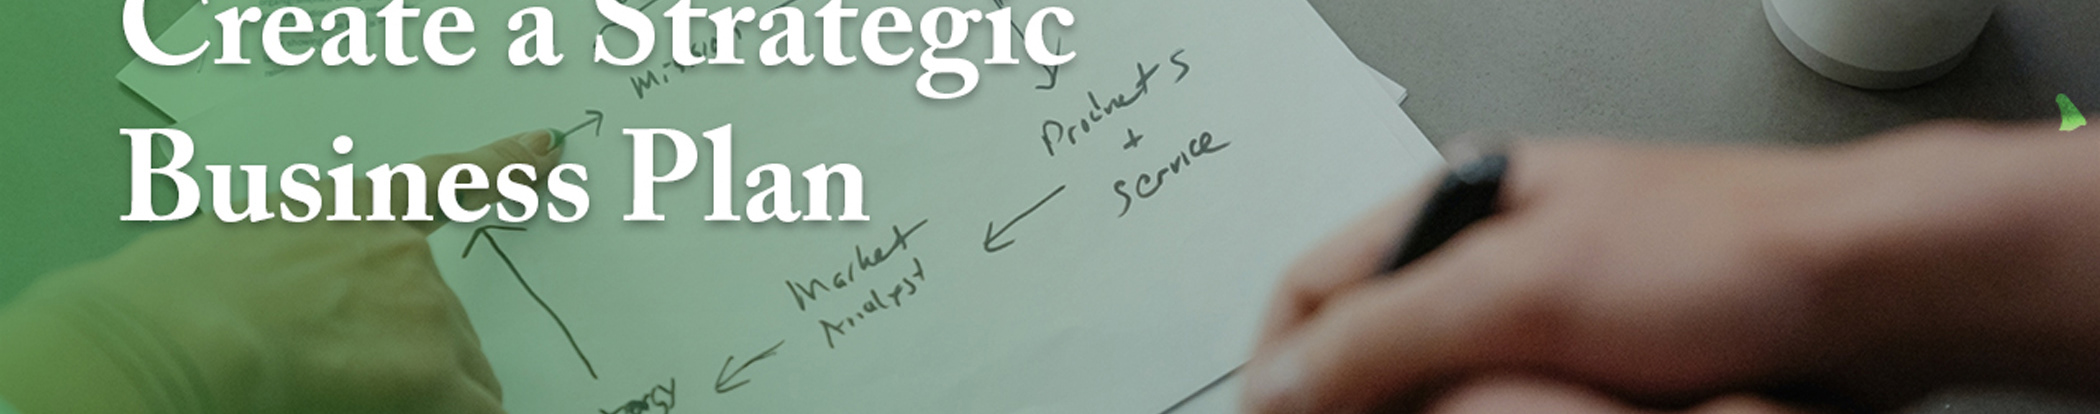 Strategy Execution Software's profile banner